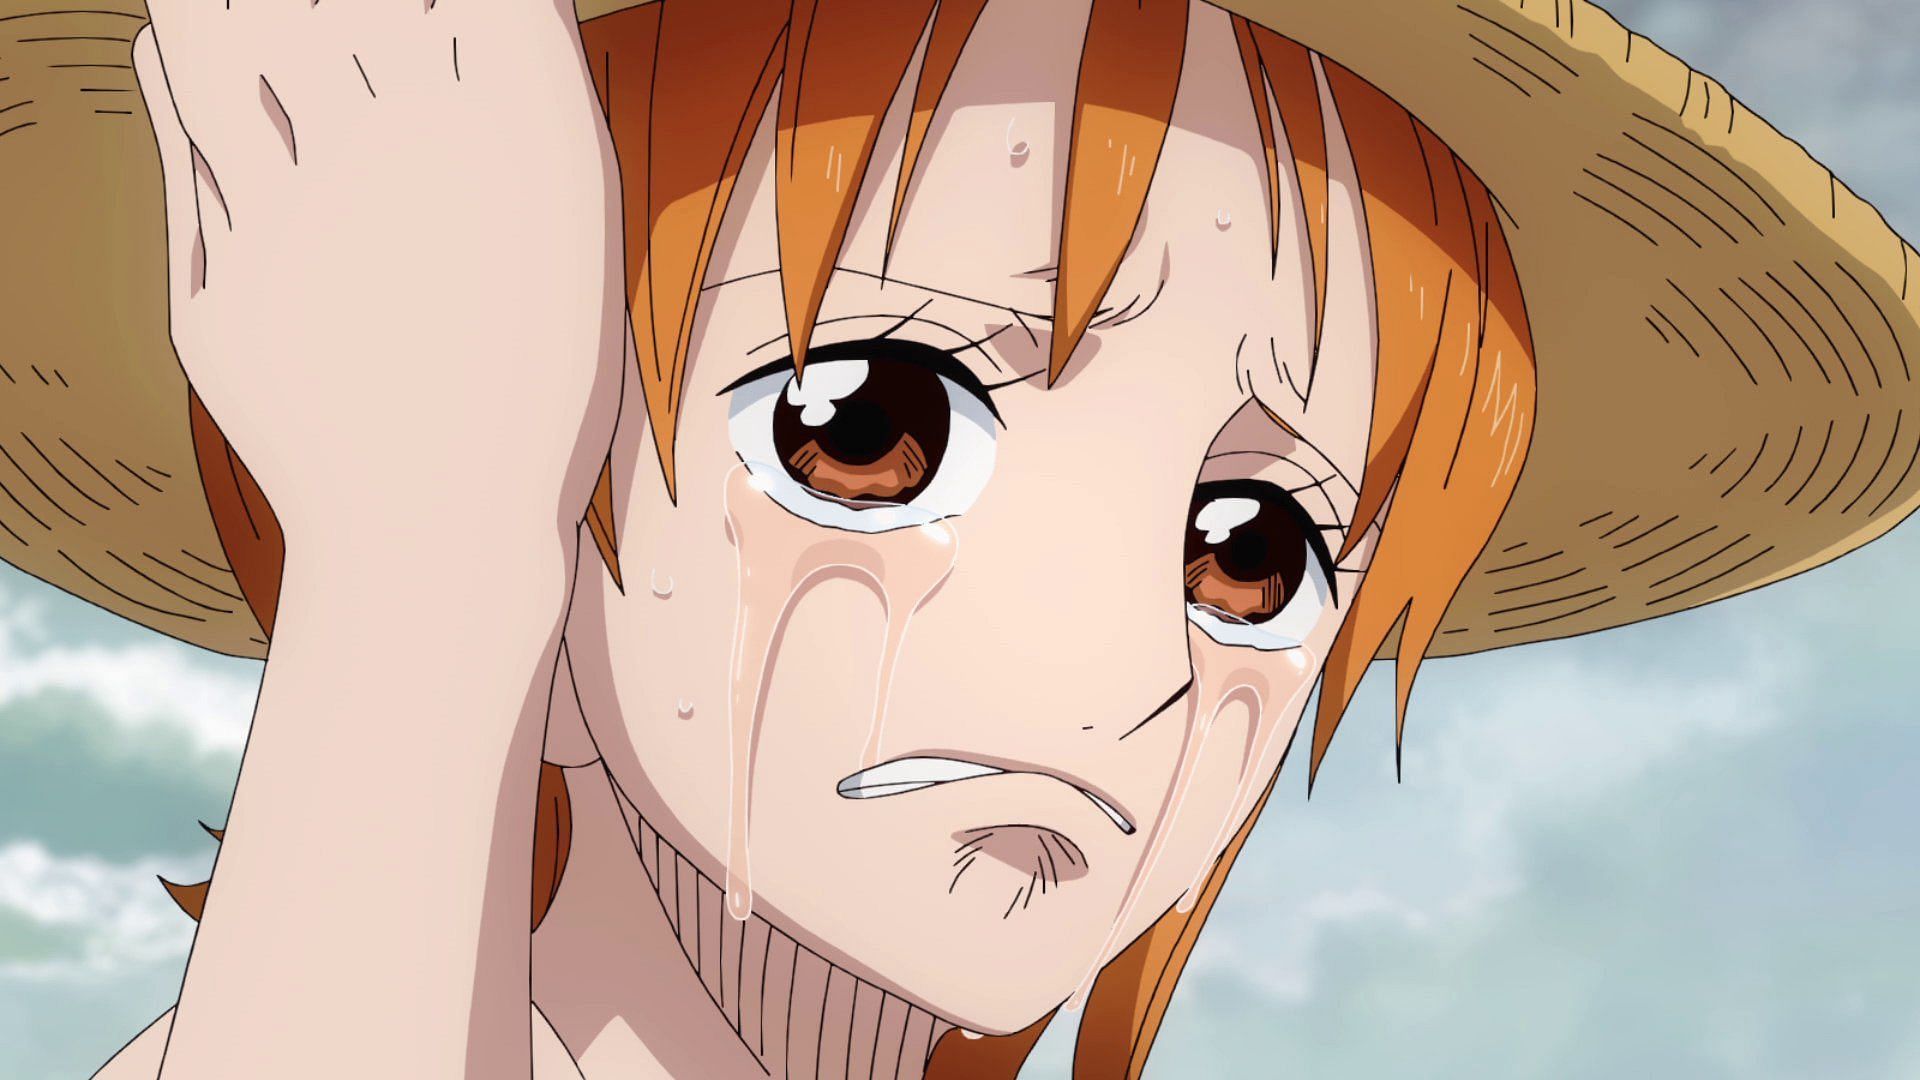 Nami after being betrayed by Arlong (Image via Toei Animation)